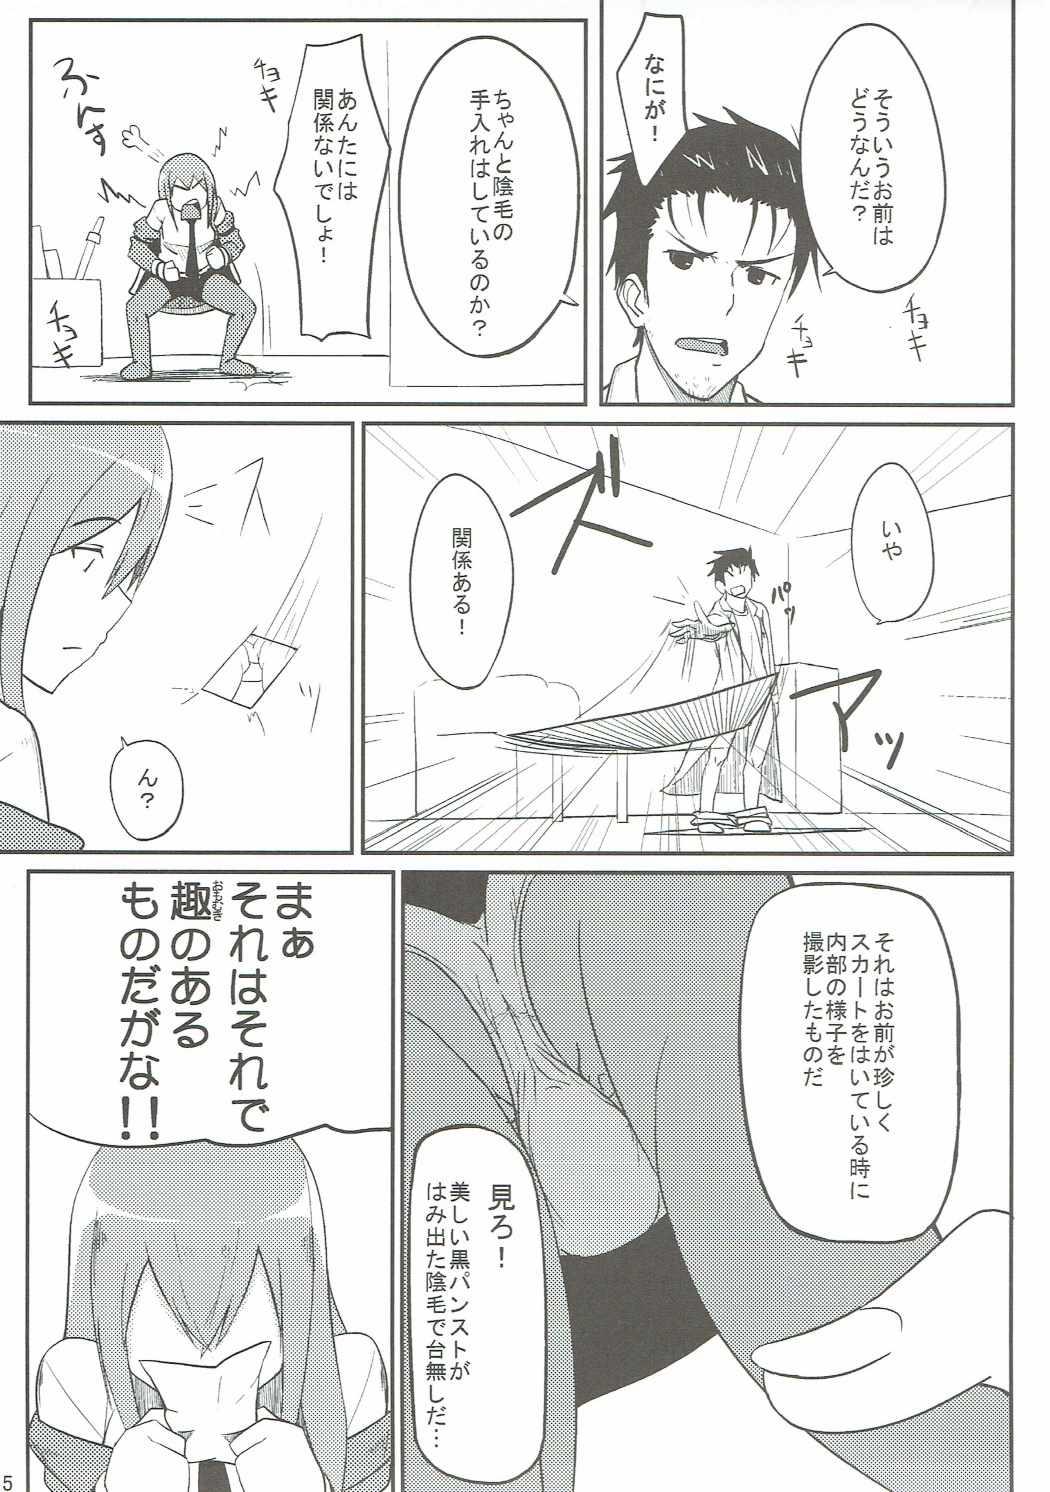 Danish Shitage - Steinsgate Homosexual - Page 4